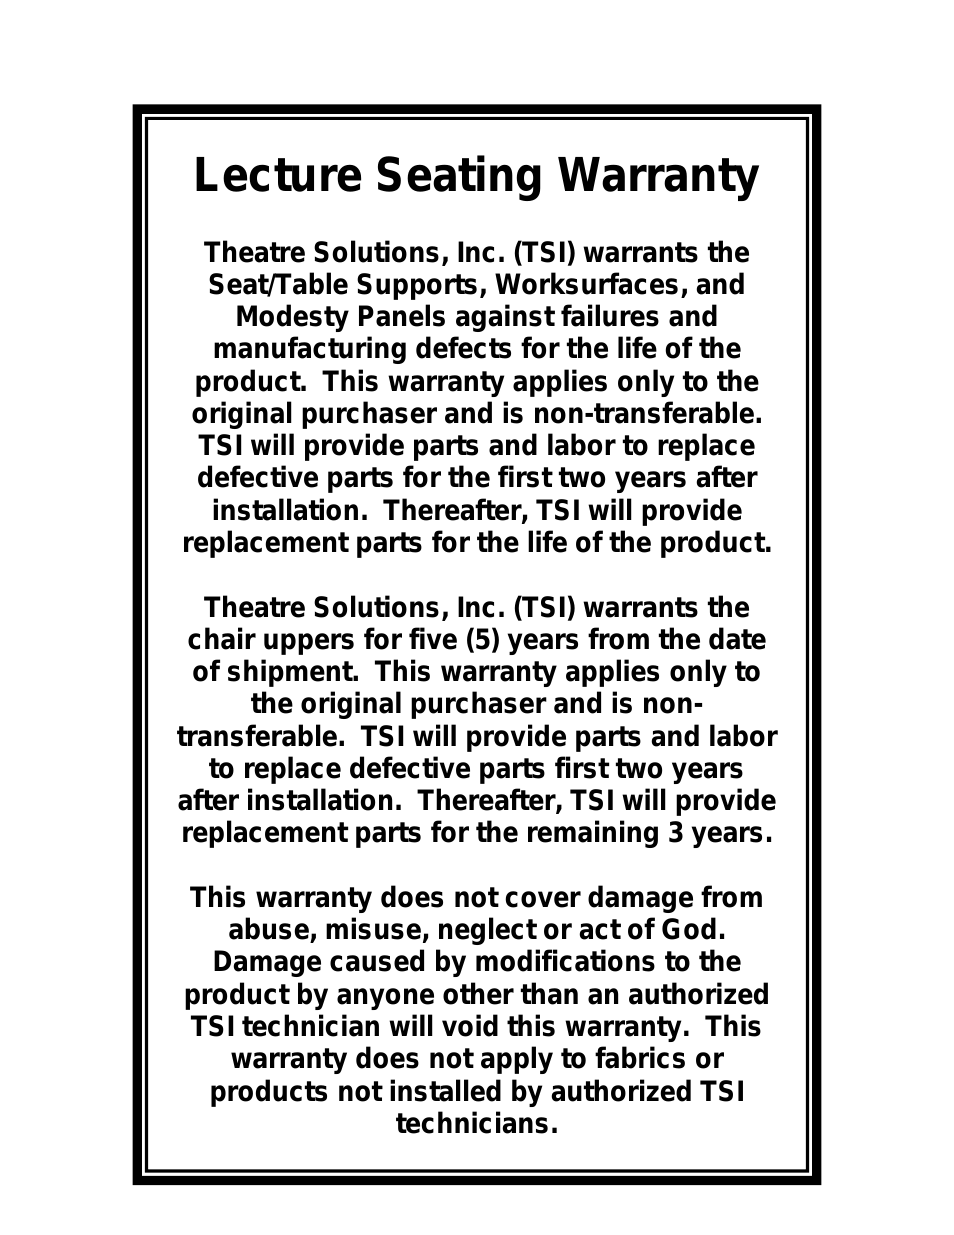 Lecture Seating Warranty